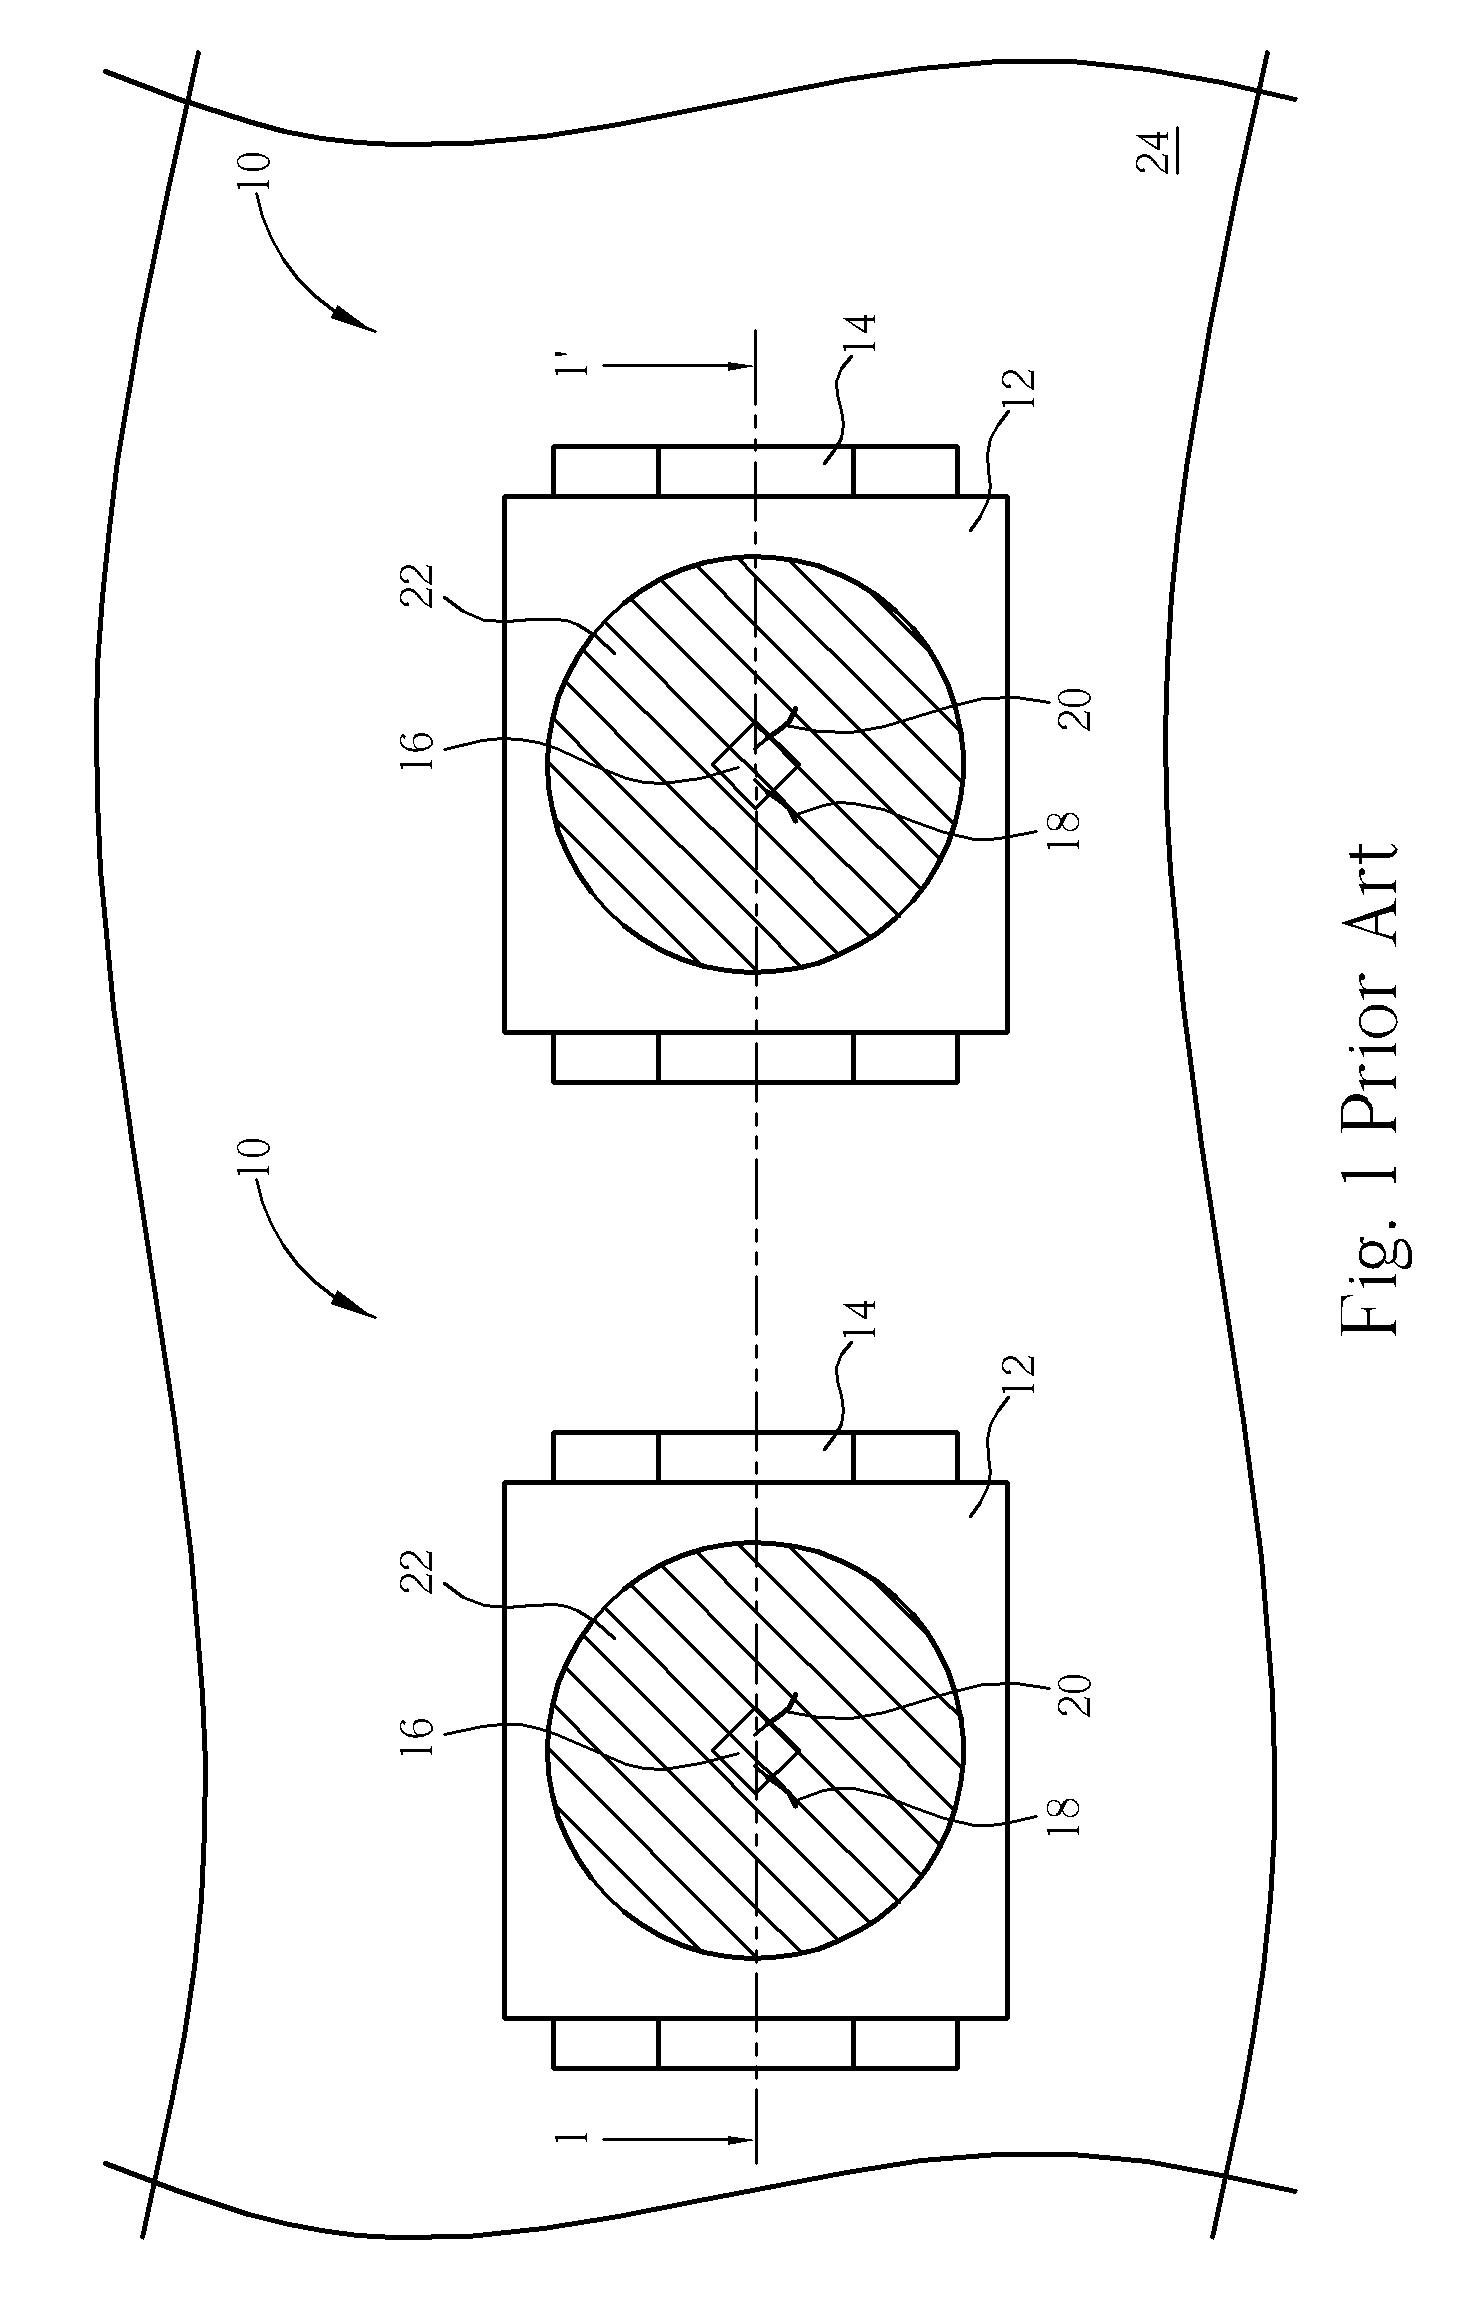 Si-substrate and structure of opto-electronic package having the same